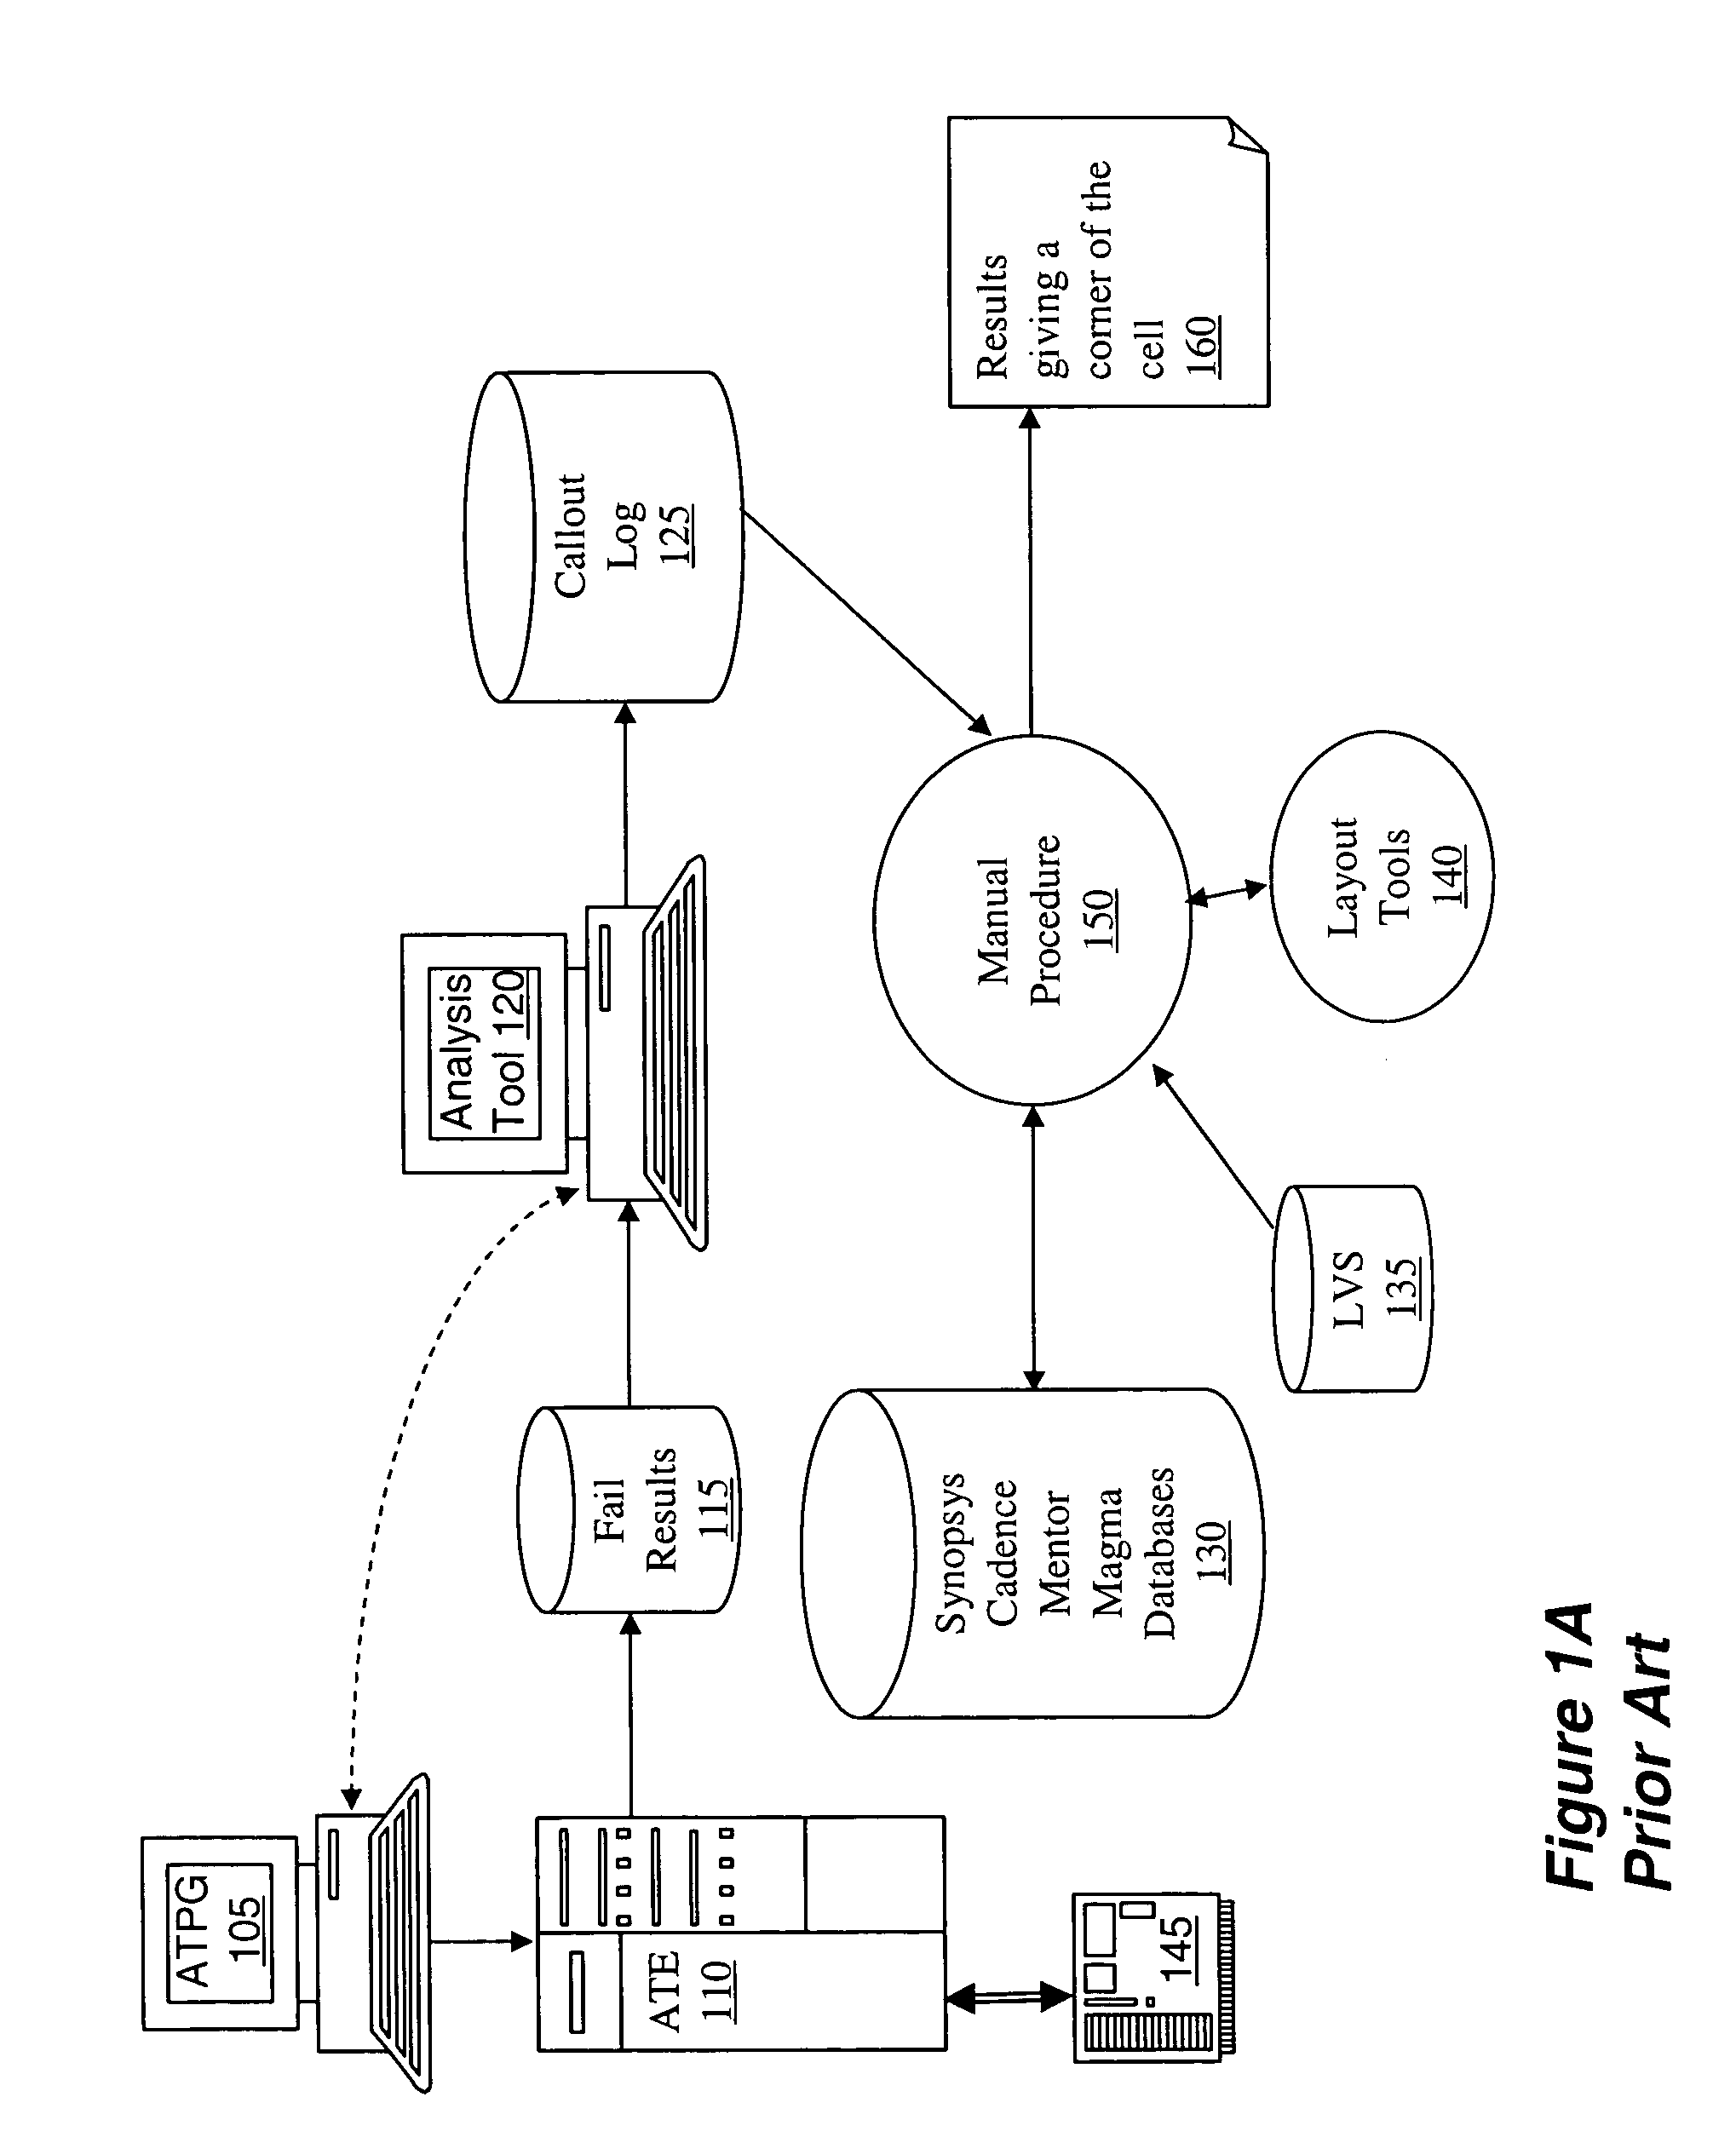 System and method for determining probing locations on IC